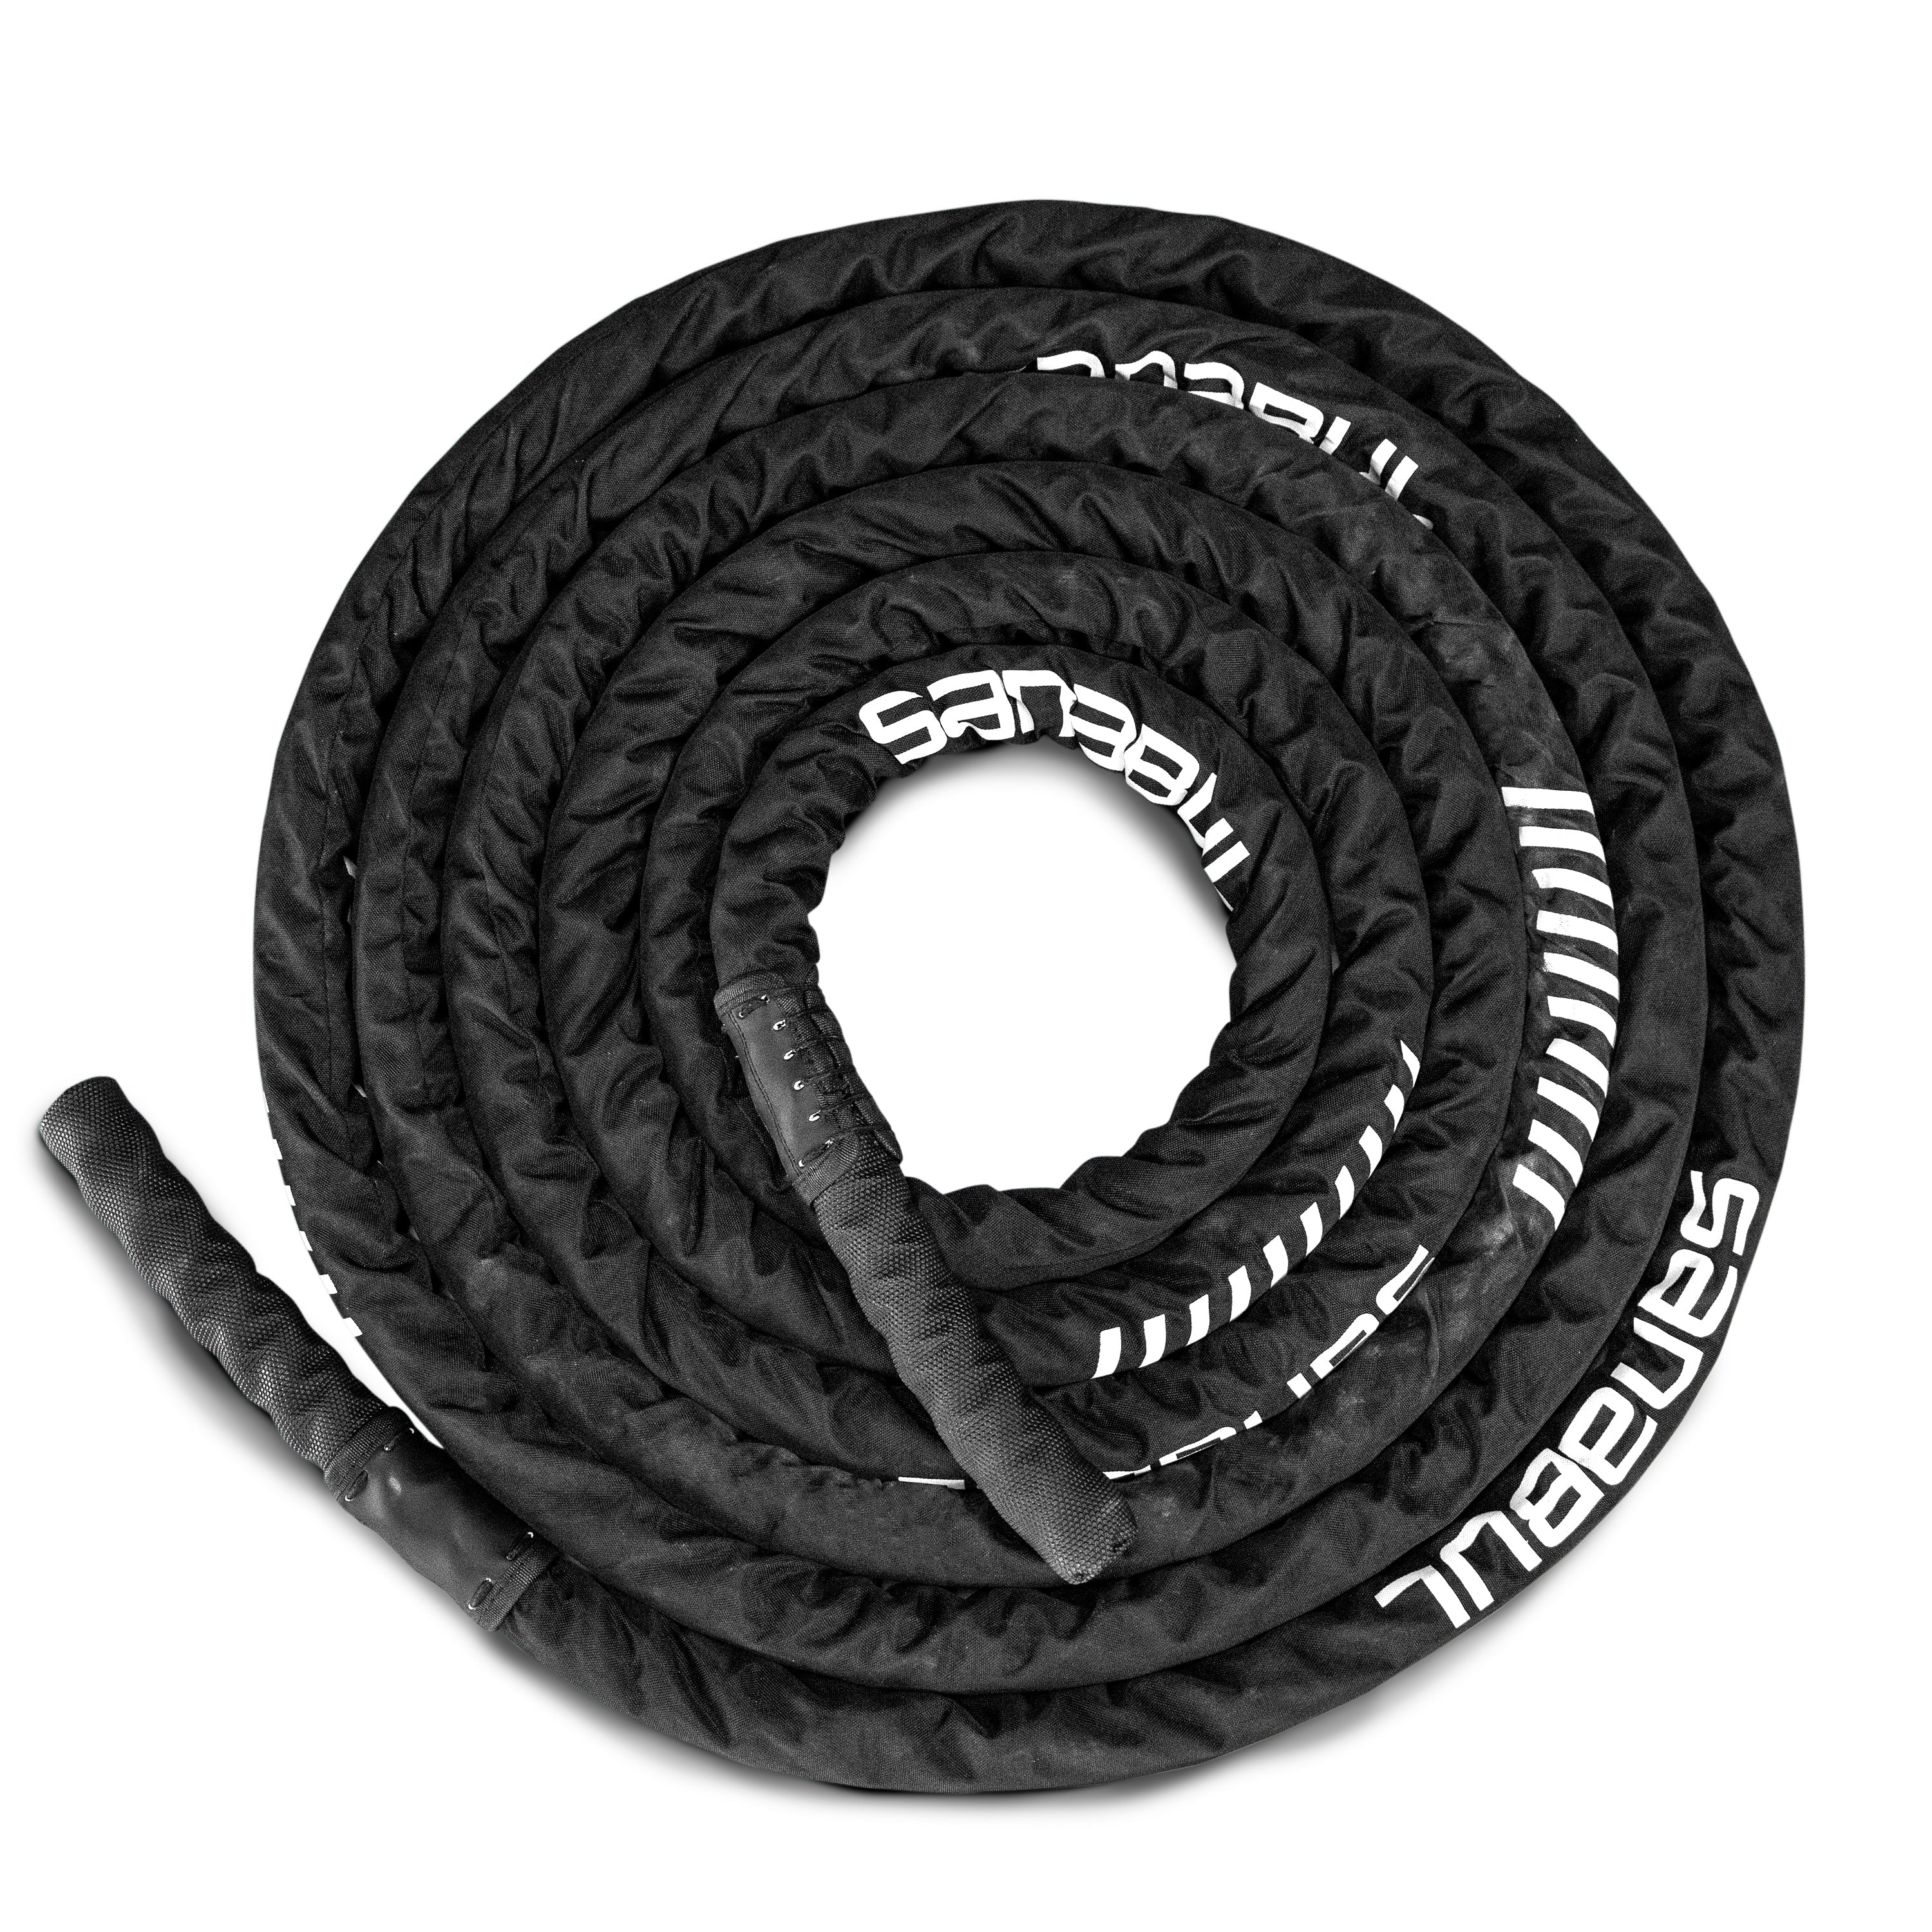 Combat Battle Fitness Rope with Protective Sheath | Sanabul, 40 ft